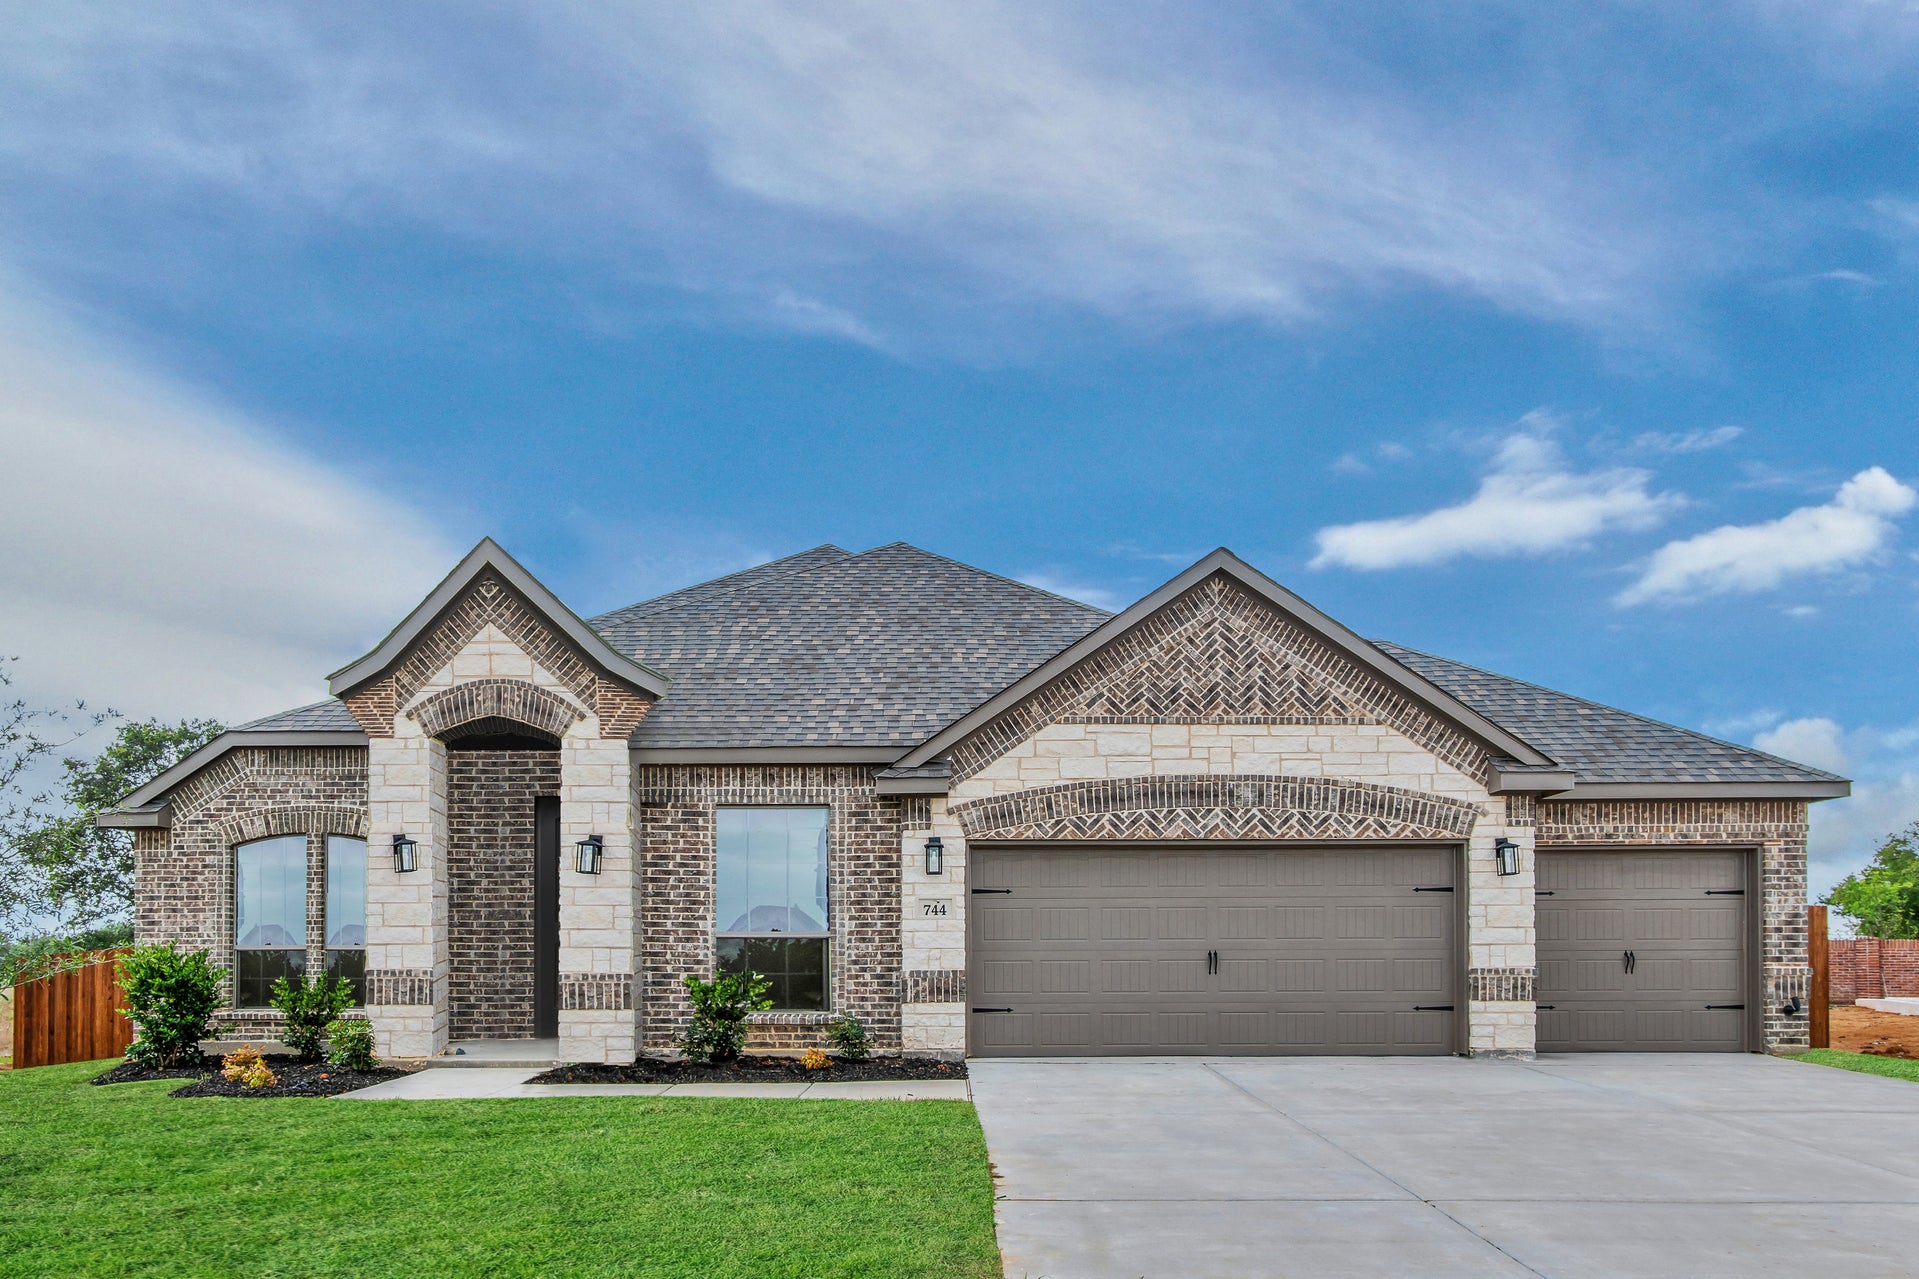 2671 A with Stone and 3-car garage. 2,671sf New Home